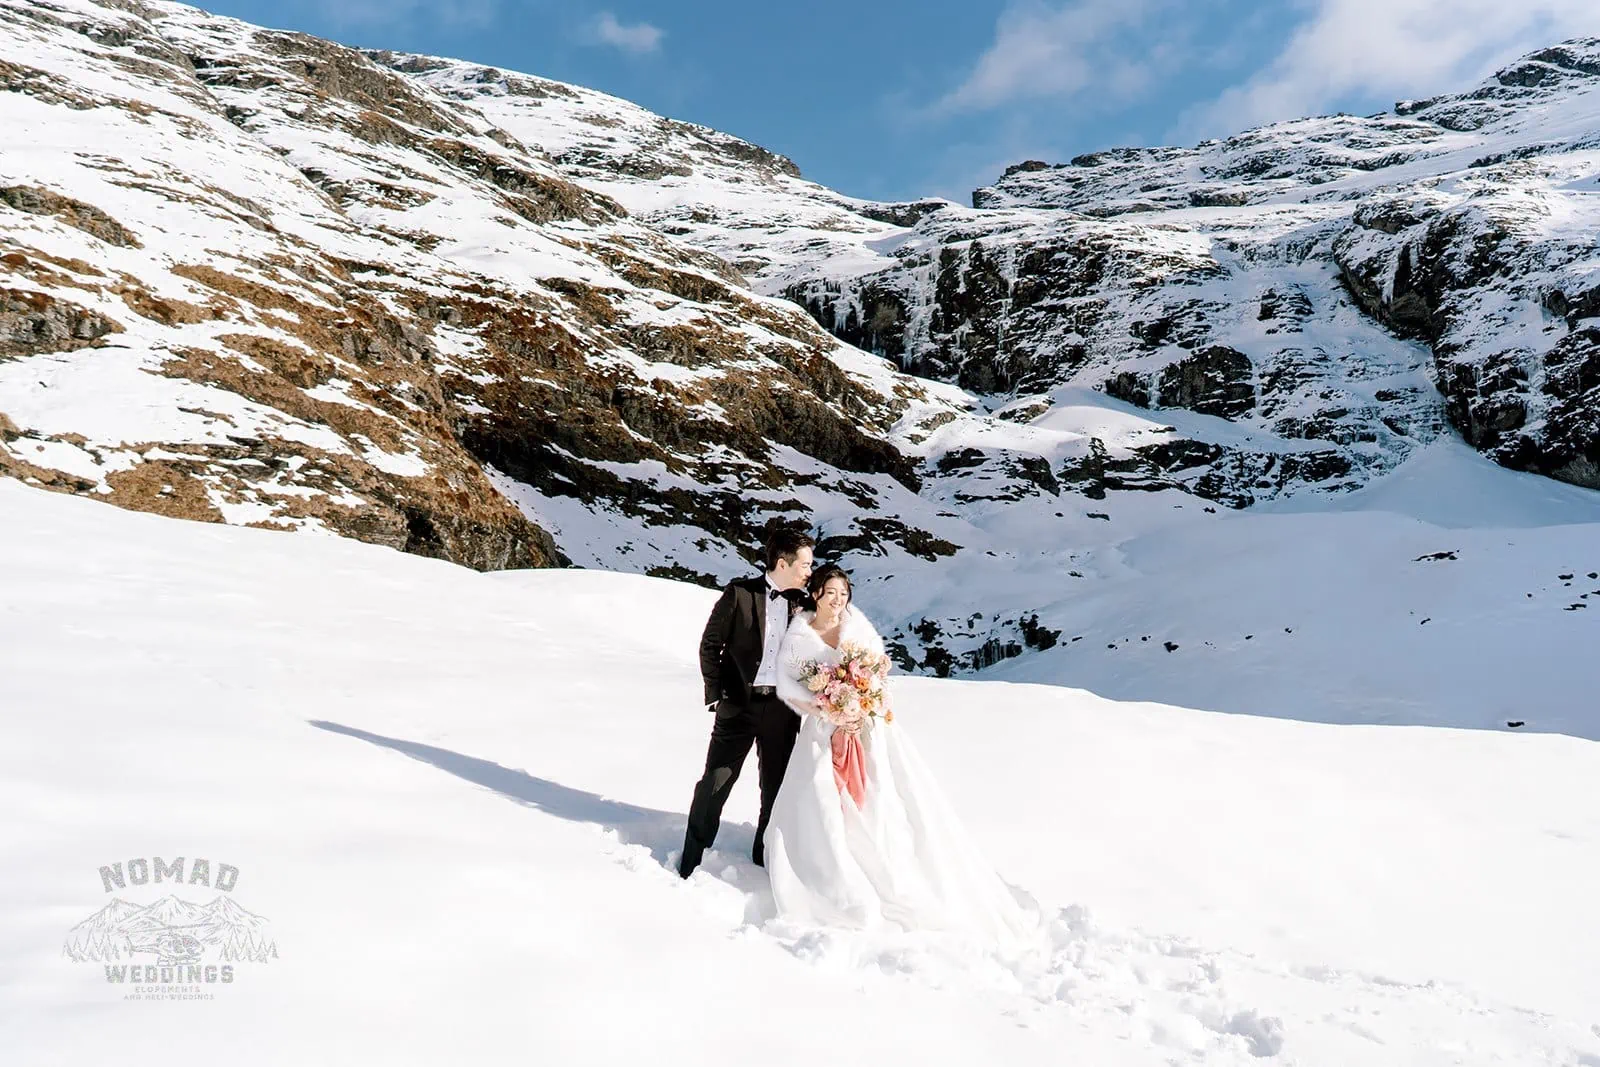 Queenstown New Zealand Elopement Wedding Photographer - Bo and Junyi embark on a snowy heli pre-wedding shoot with stunning mountain backdrops and four exhilarating landings.